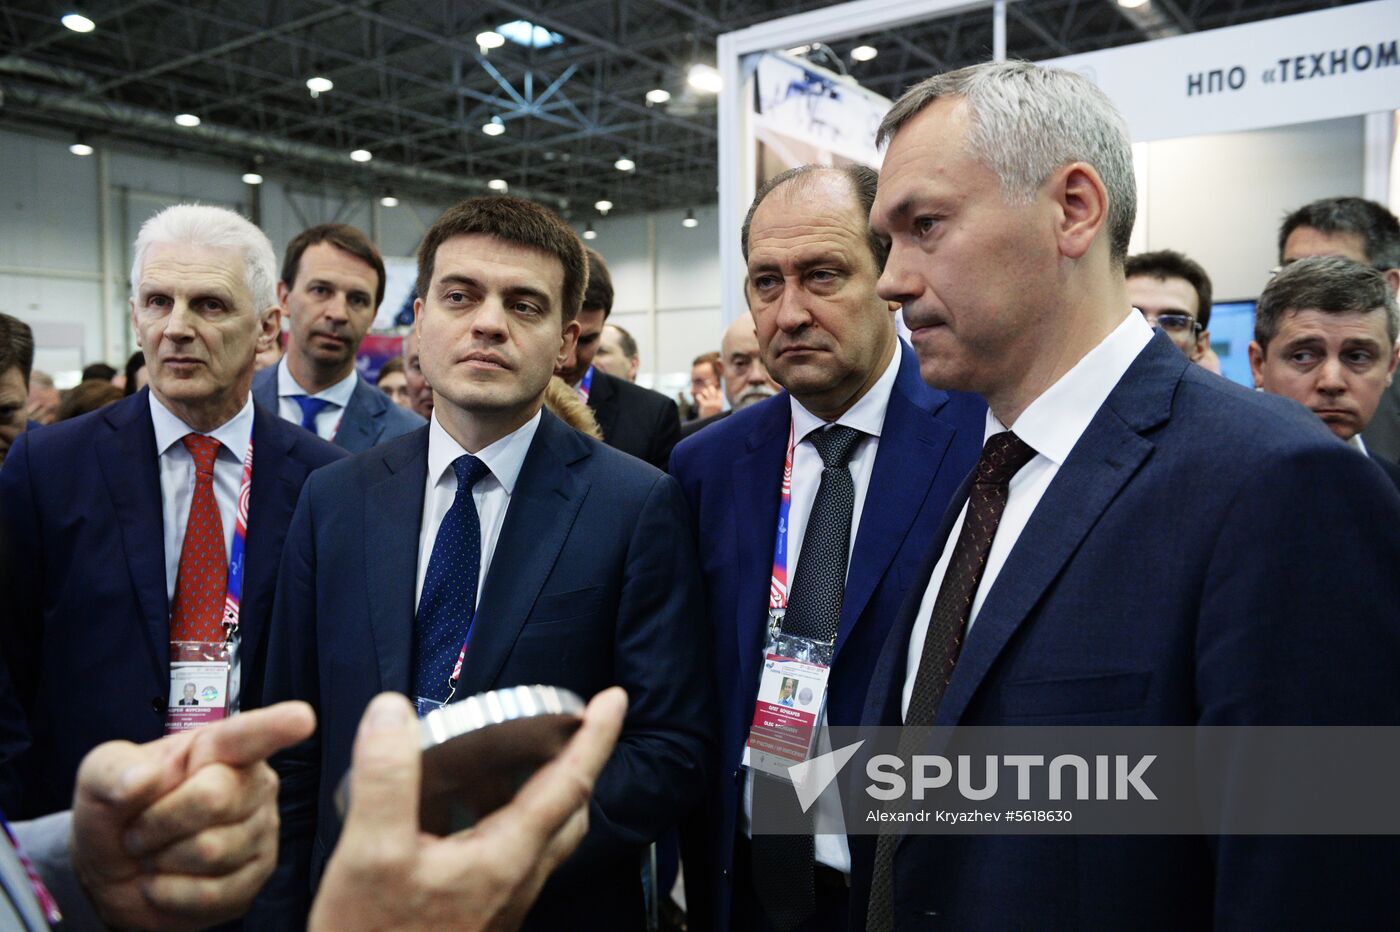 6th International Forum and Exhibition of Technological Development Technoprom 2018